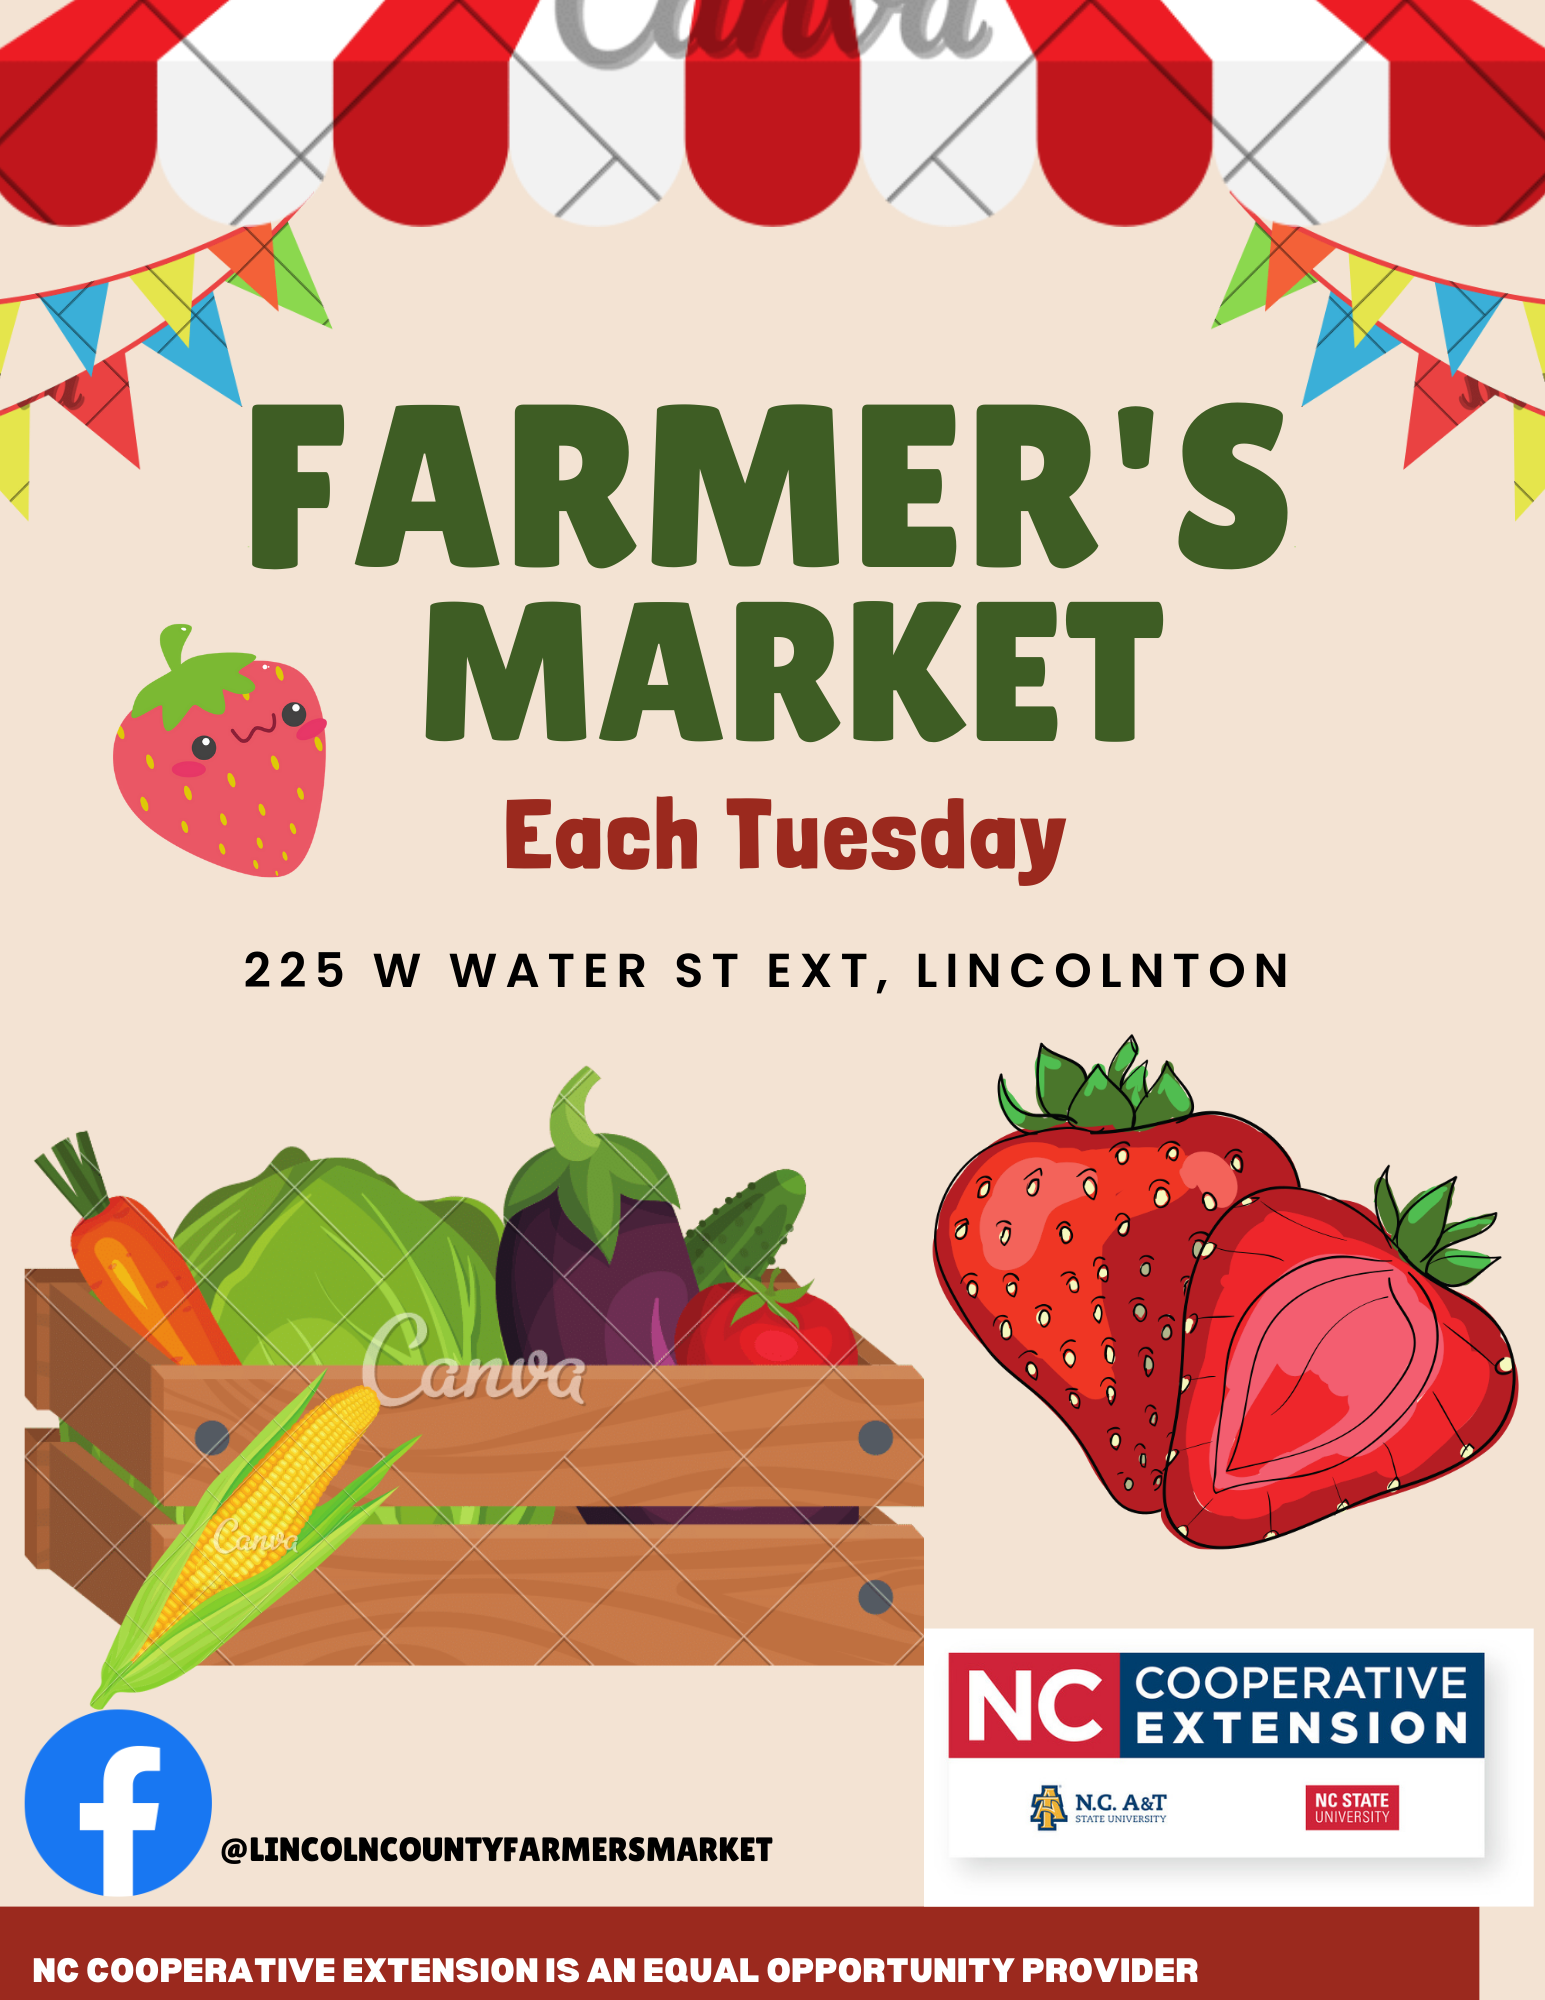 Lincoln County Farmer's Market each Tuesday. 225 W Water St EXT, Lincolnton